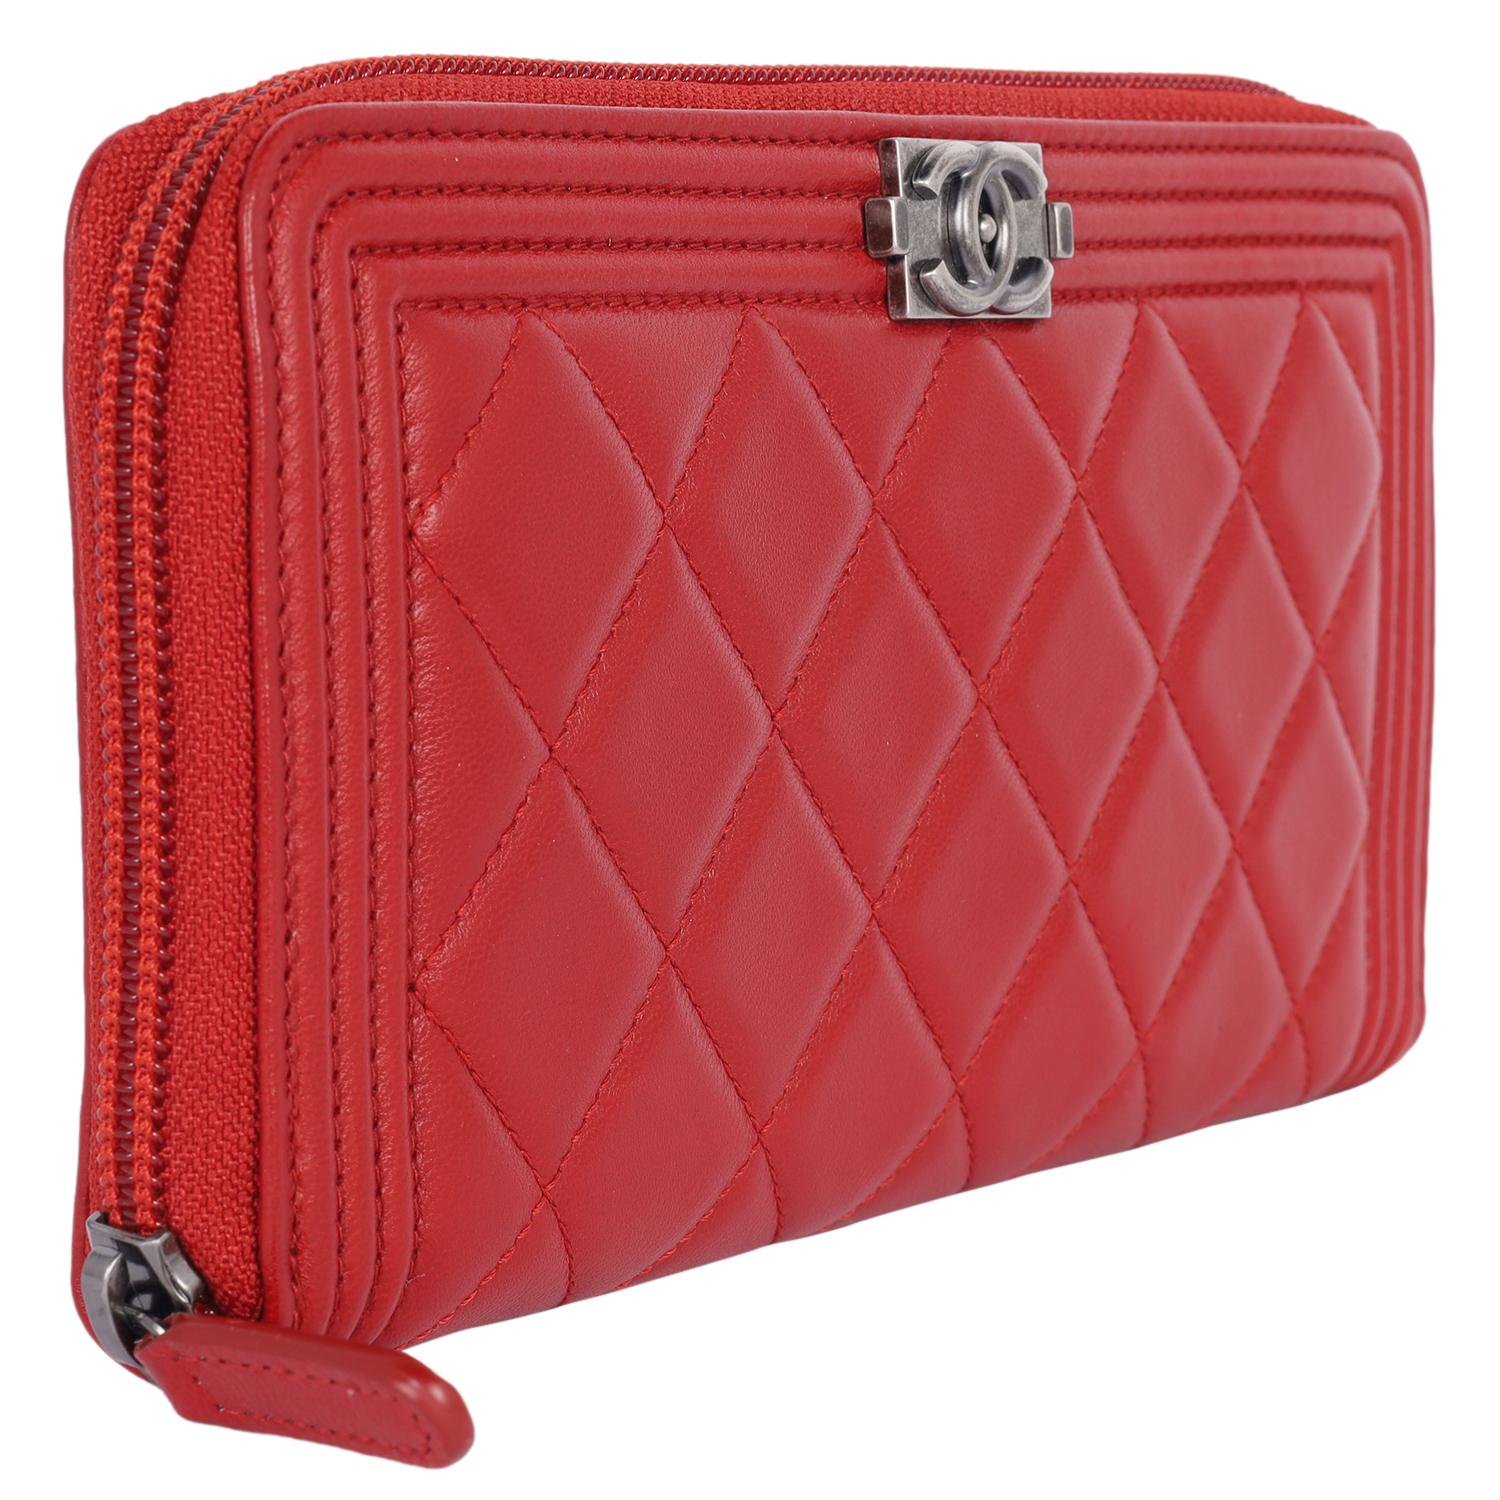 Chanel Boy Lambskin Zip Around Long Wallet Red In Excellent Condition For Sale In Salt Lake Cty, UT